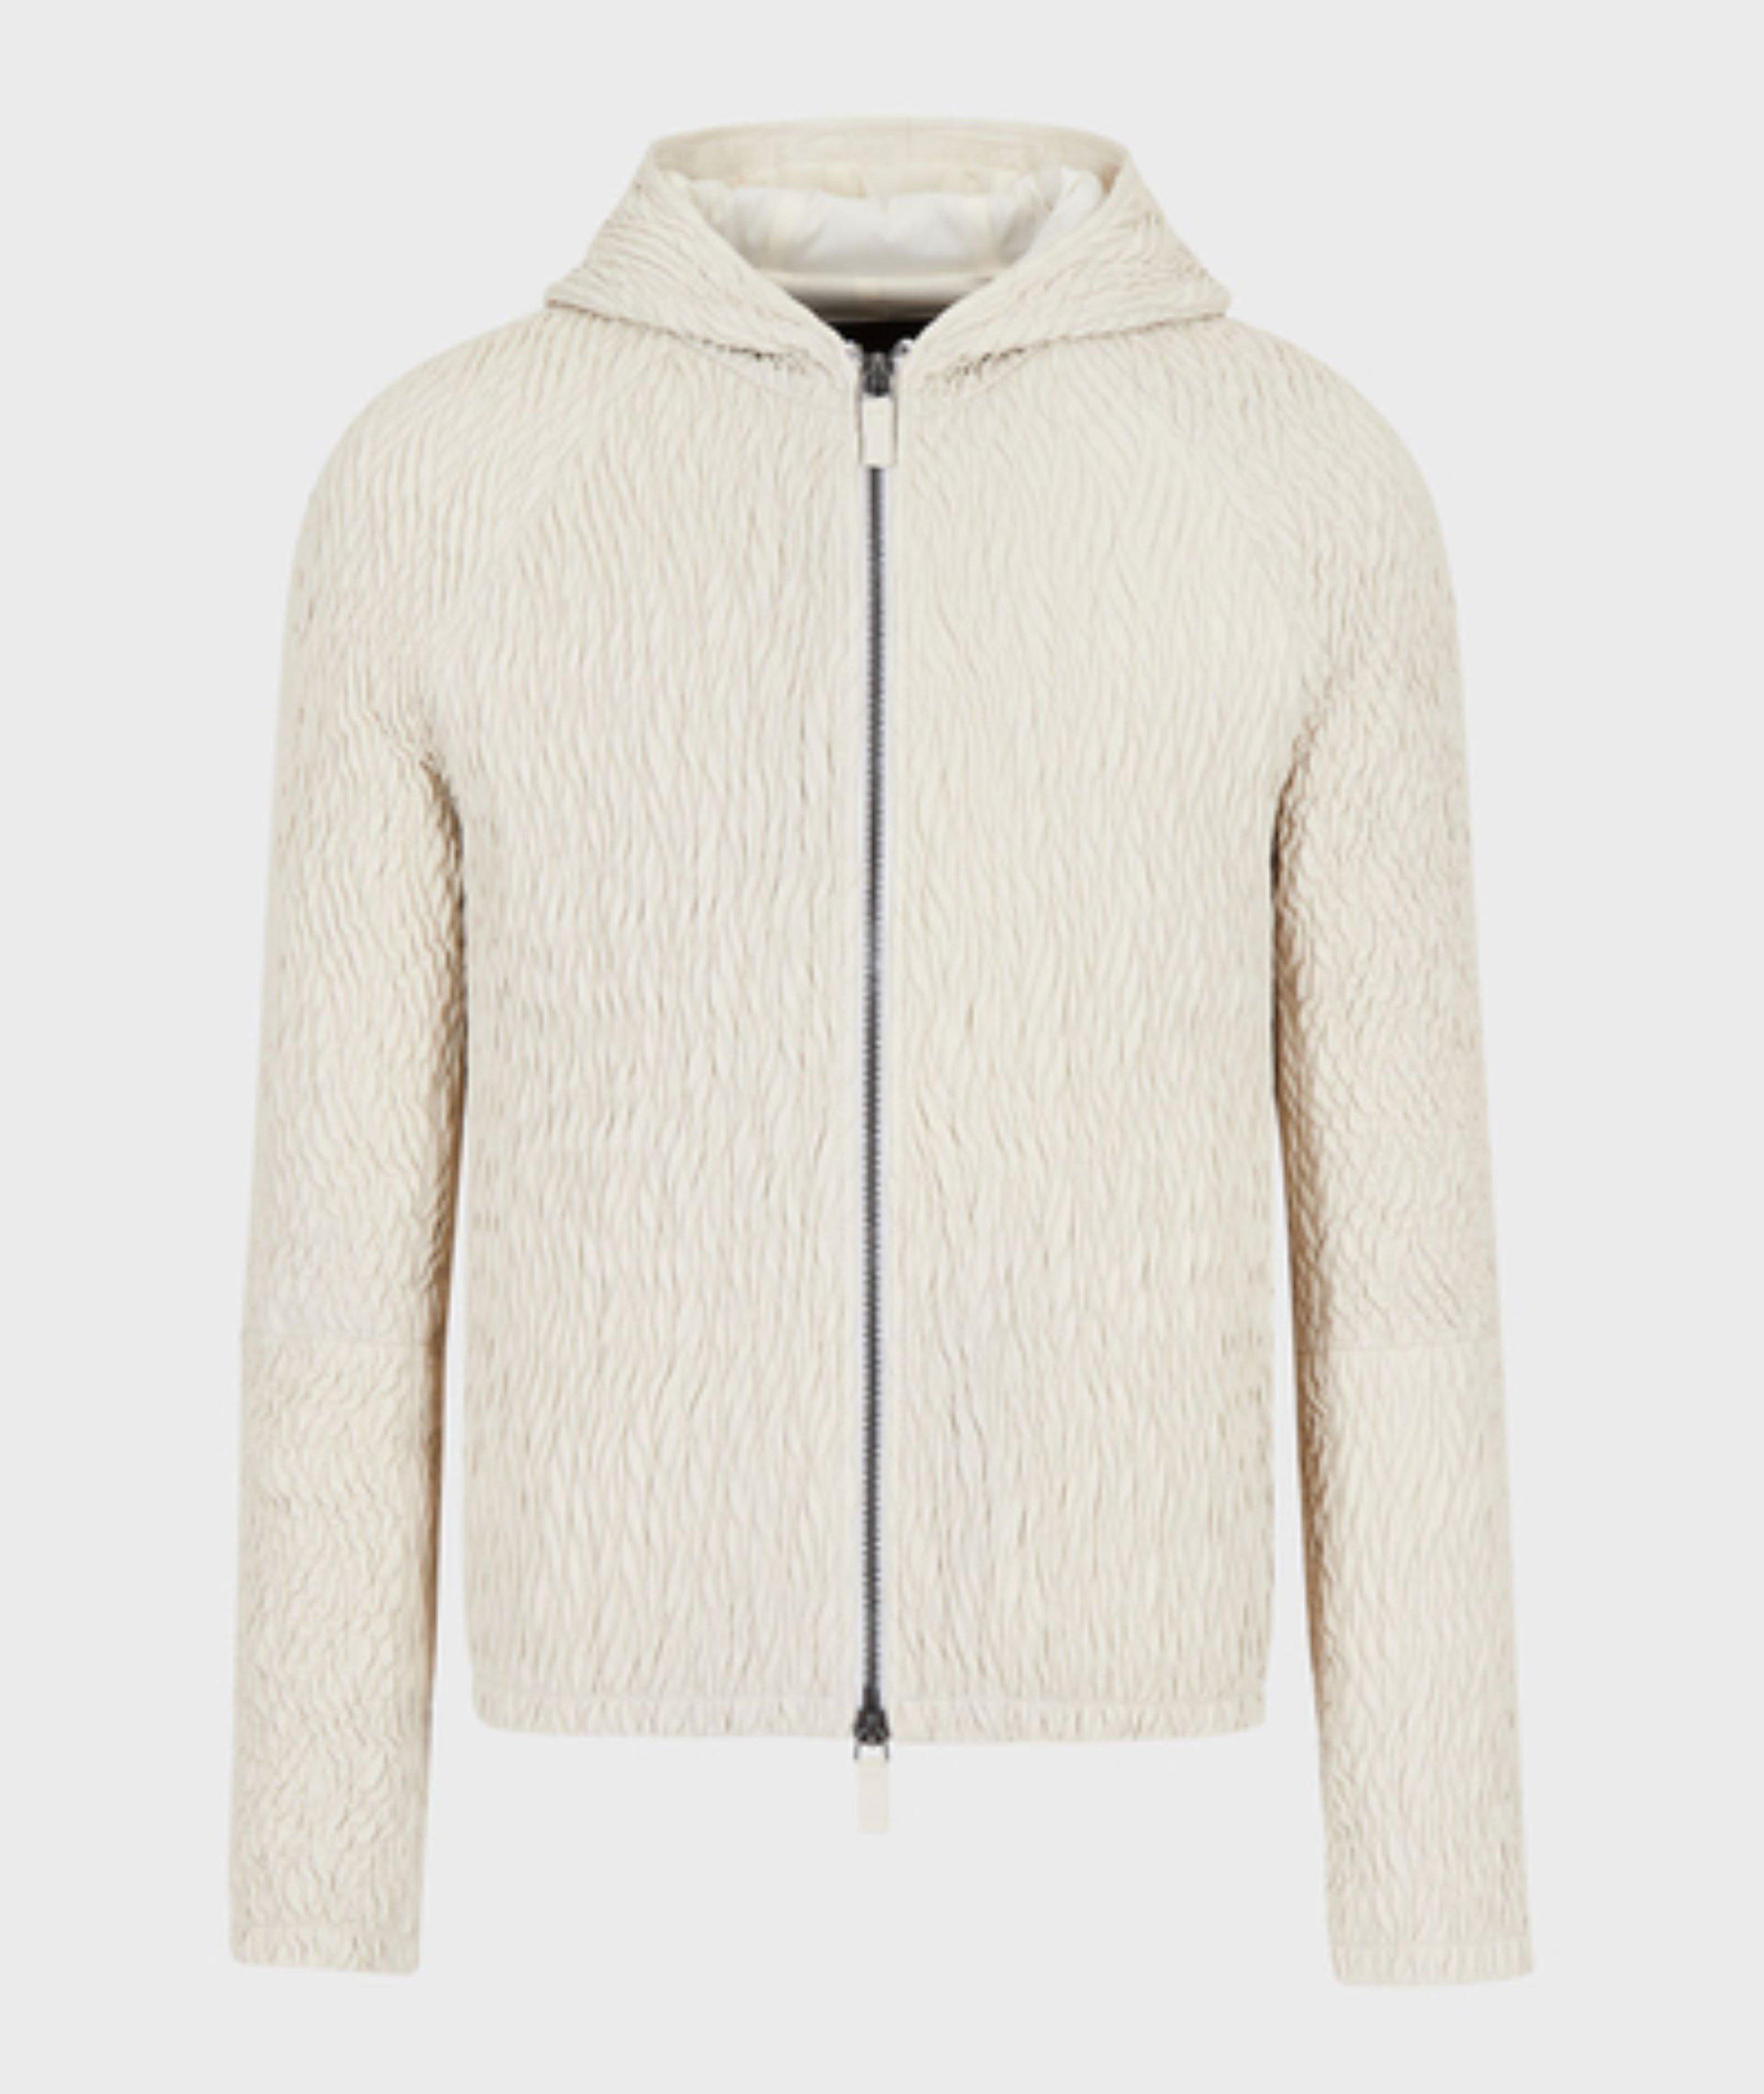 Textured Full-Zip Hooded Sweater image 0